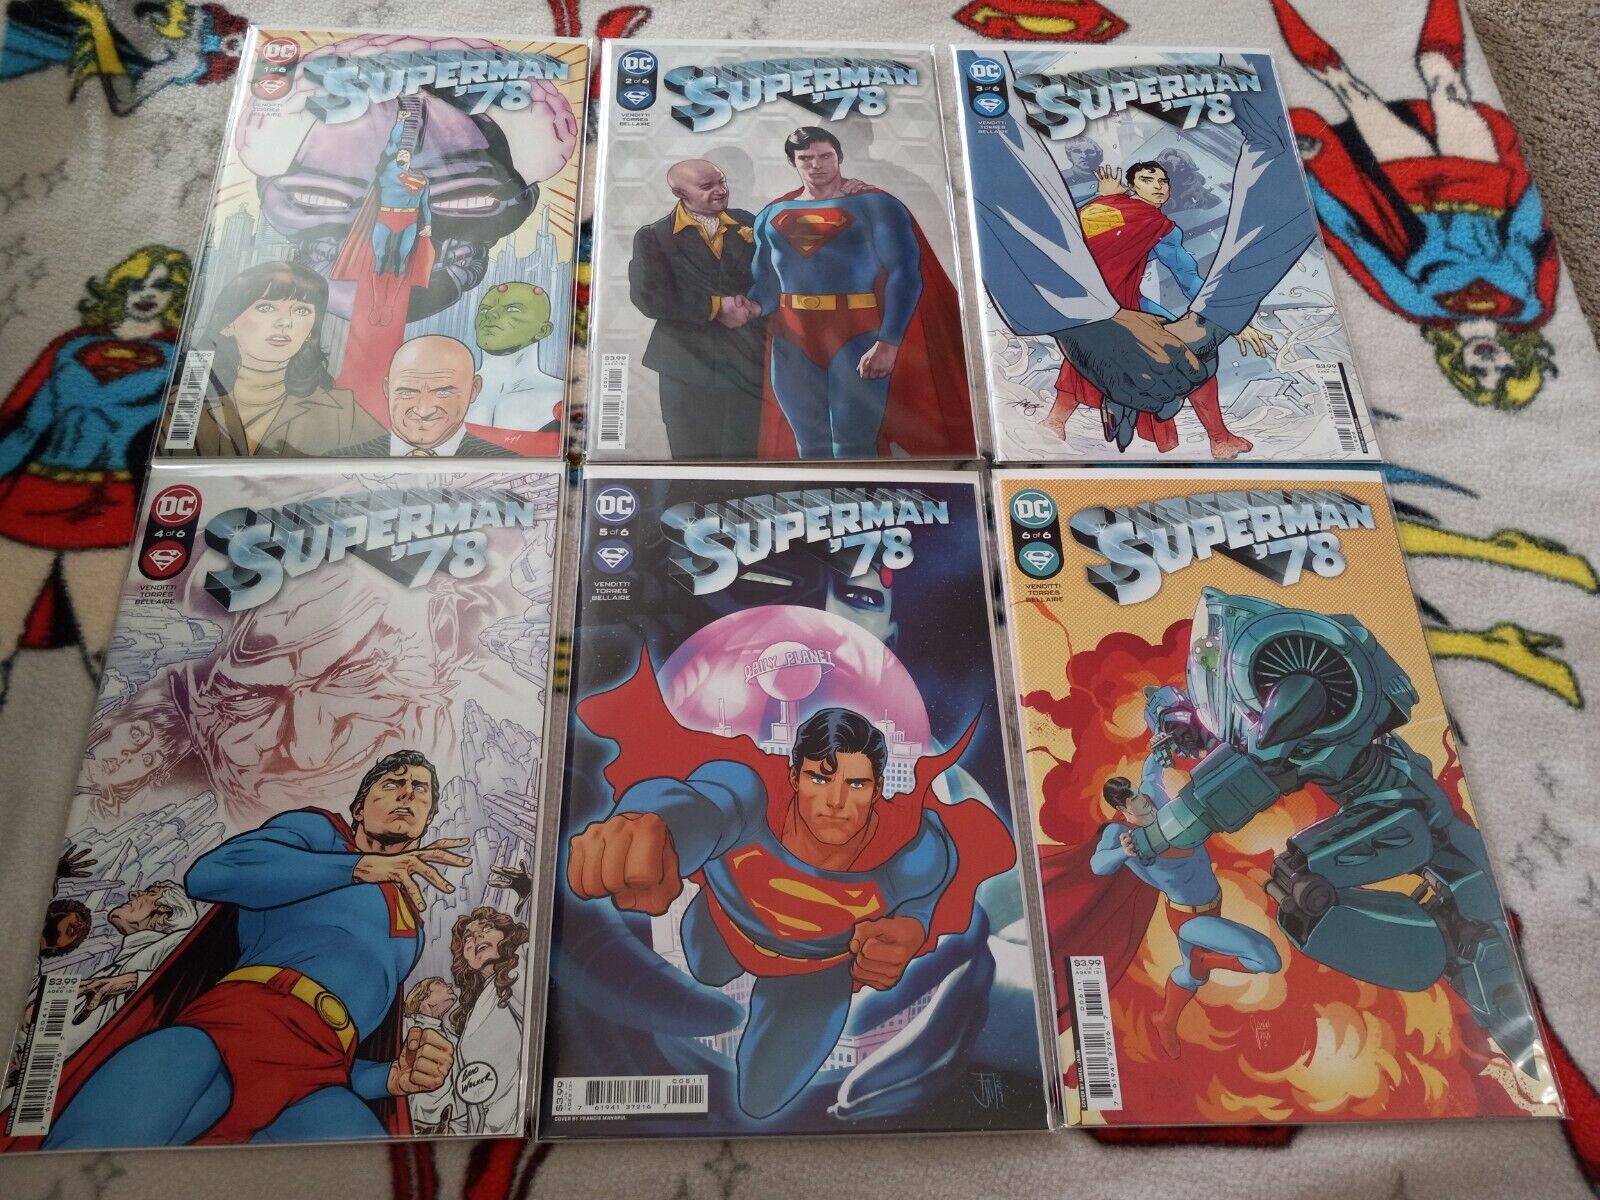 DC Superman 78 #1-6 COMPLETE SET Reeve Movie Continuation 1 2 3 4 5 6